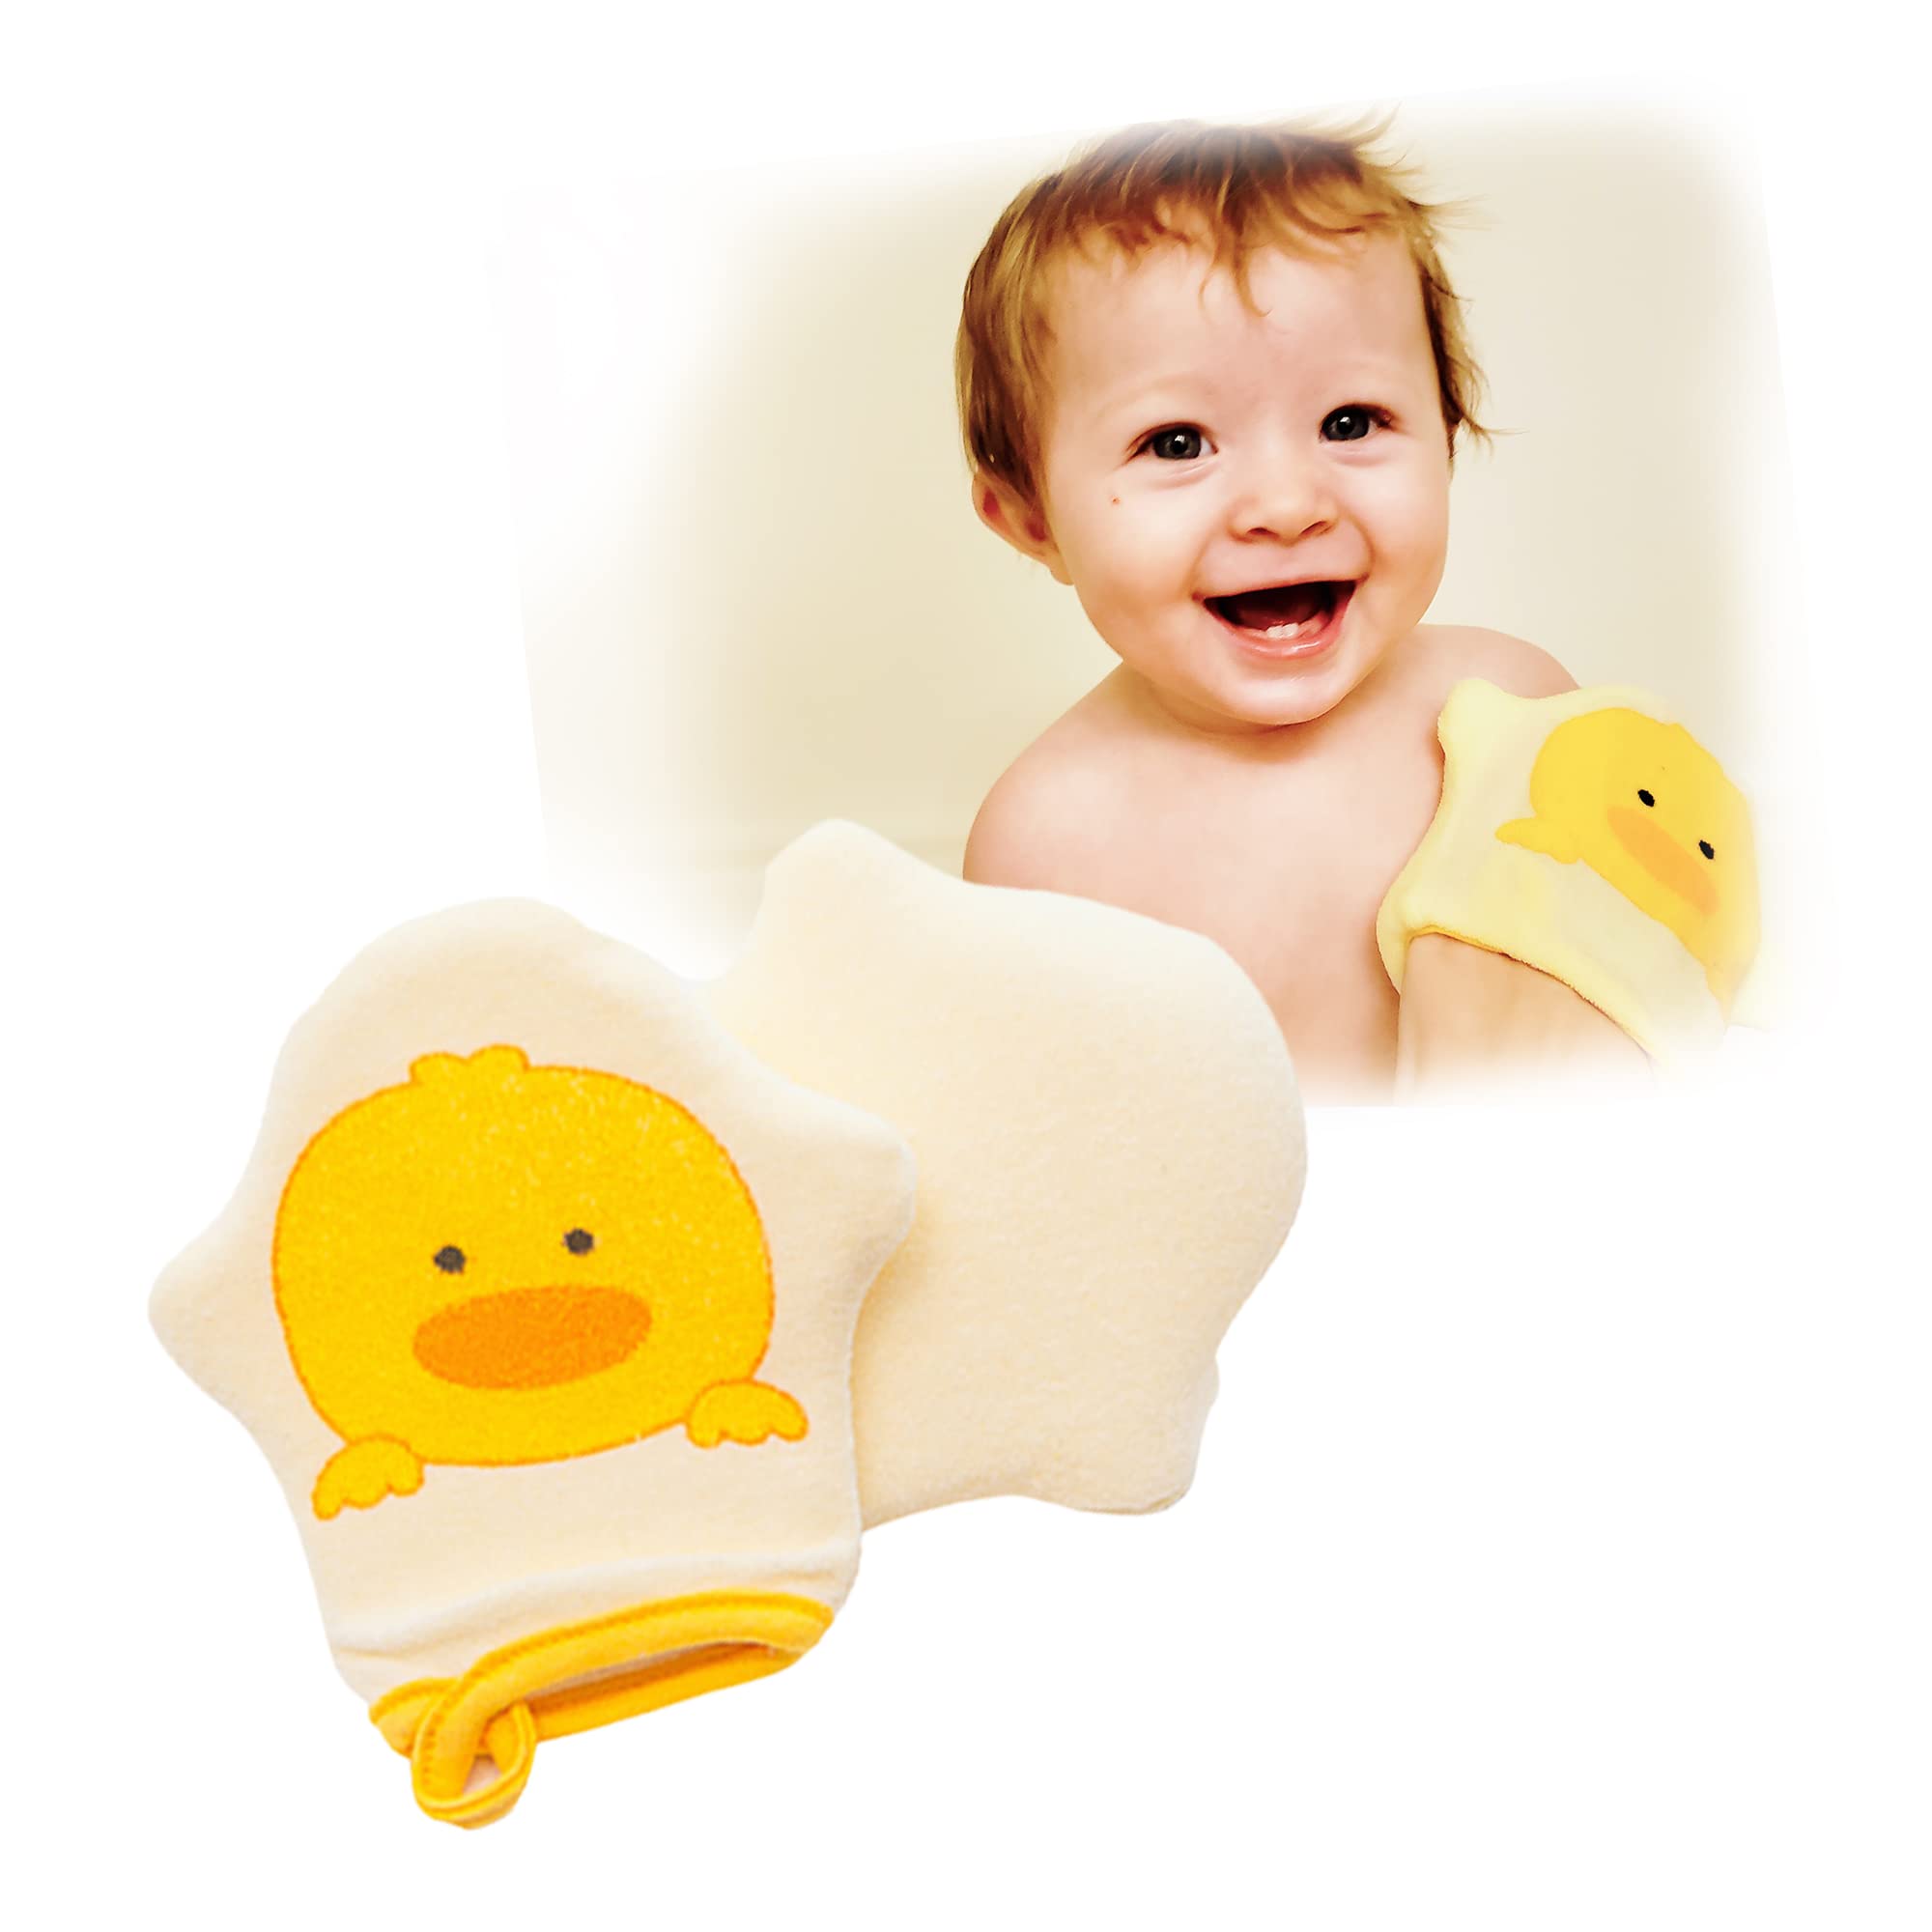 Bath Sponge Gift for Babies or Toddlers